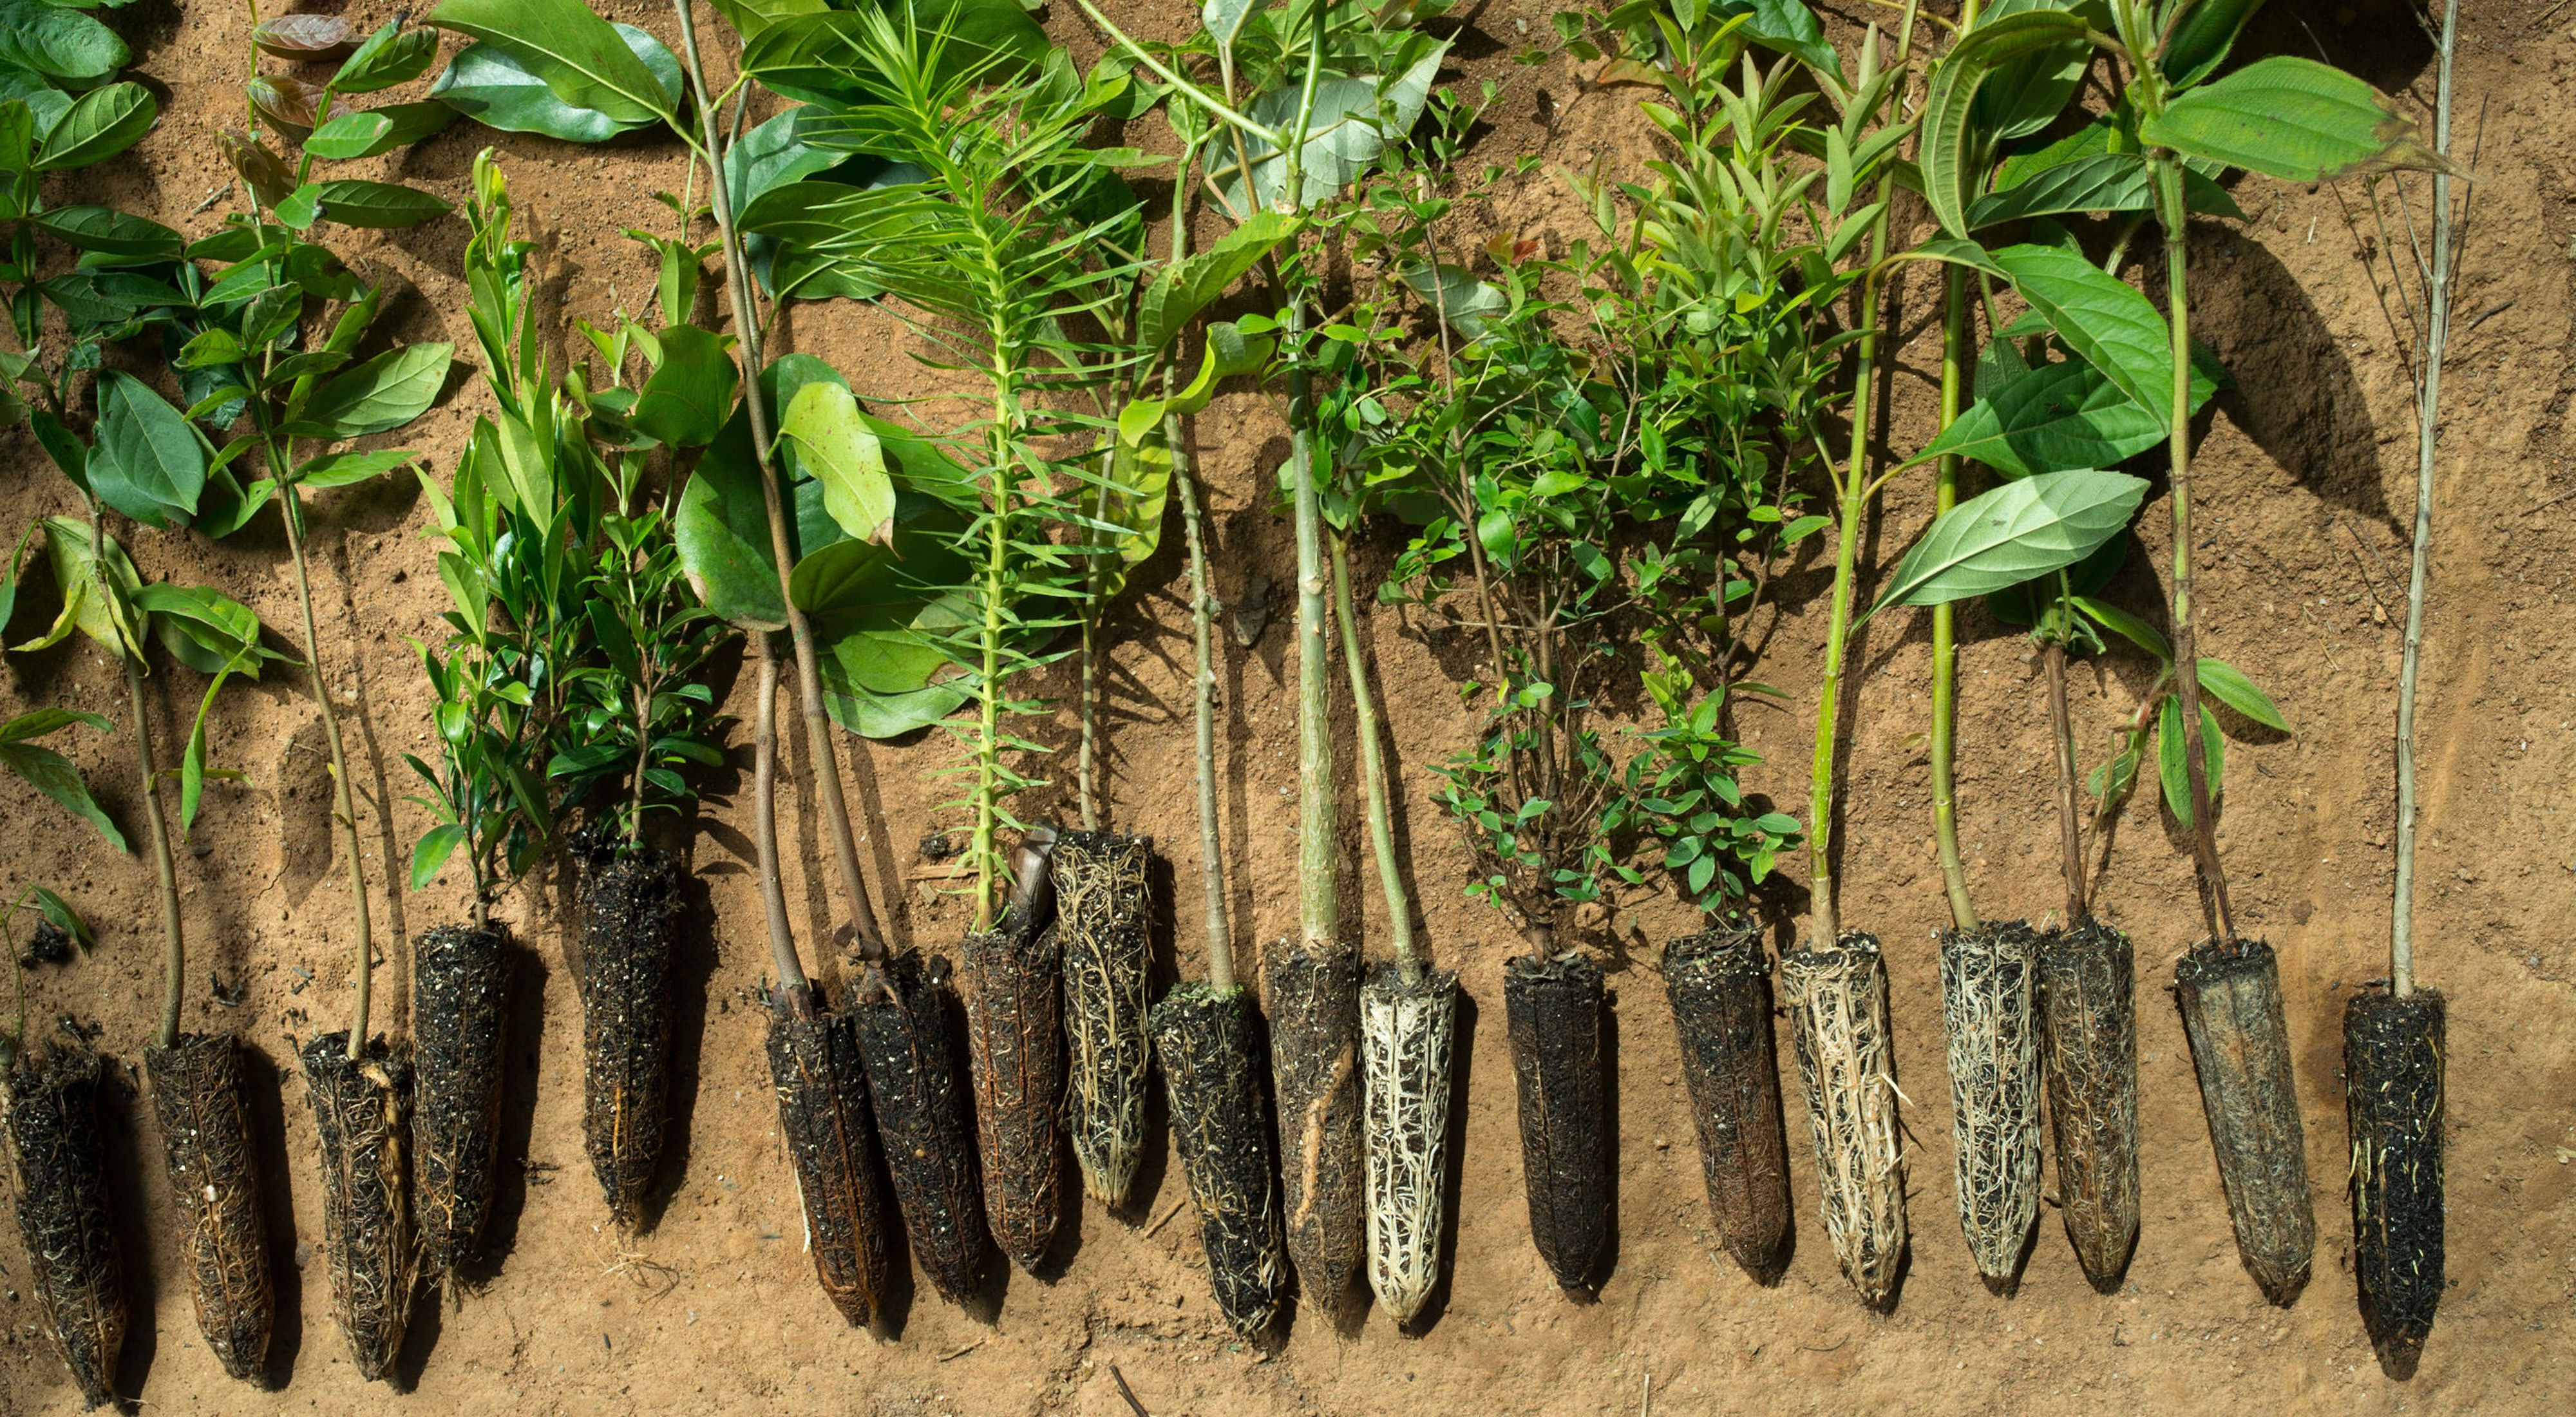 Native tree saplings are prepared for planting in the Mantiqueria range of Brazil's Atlantic Forest. TNC's Tackle Climate Change Program.         